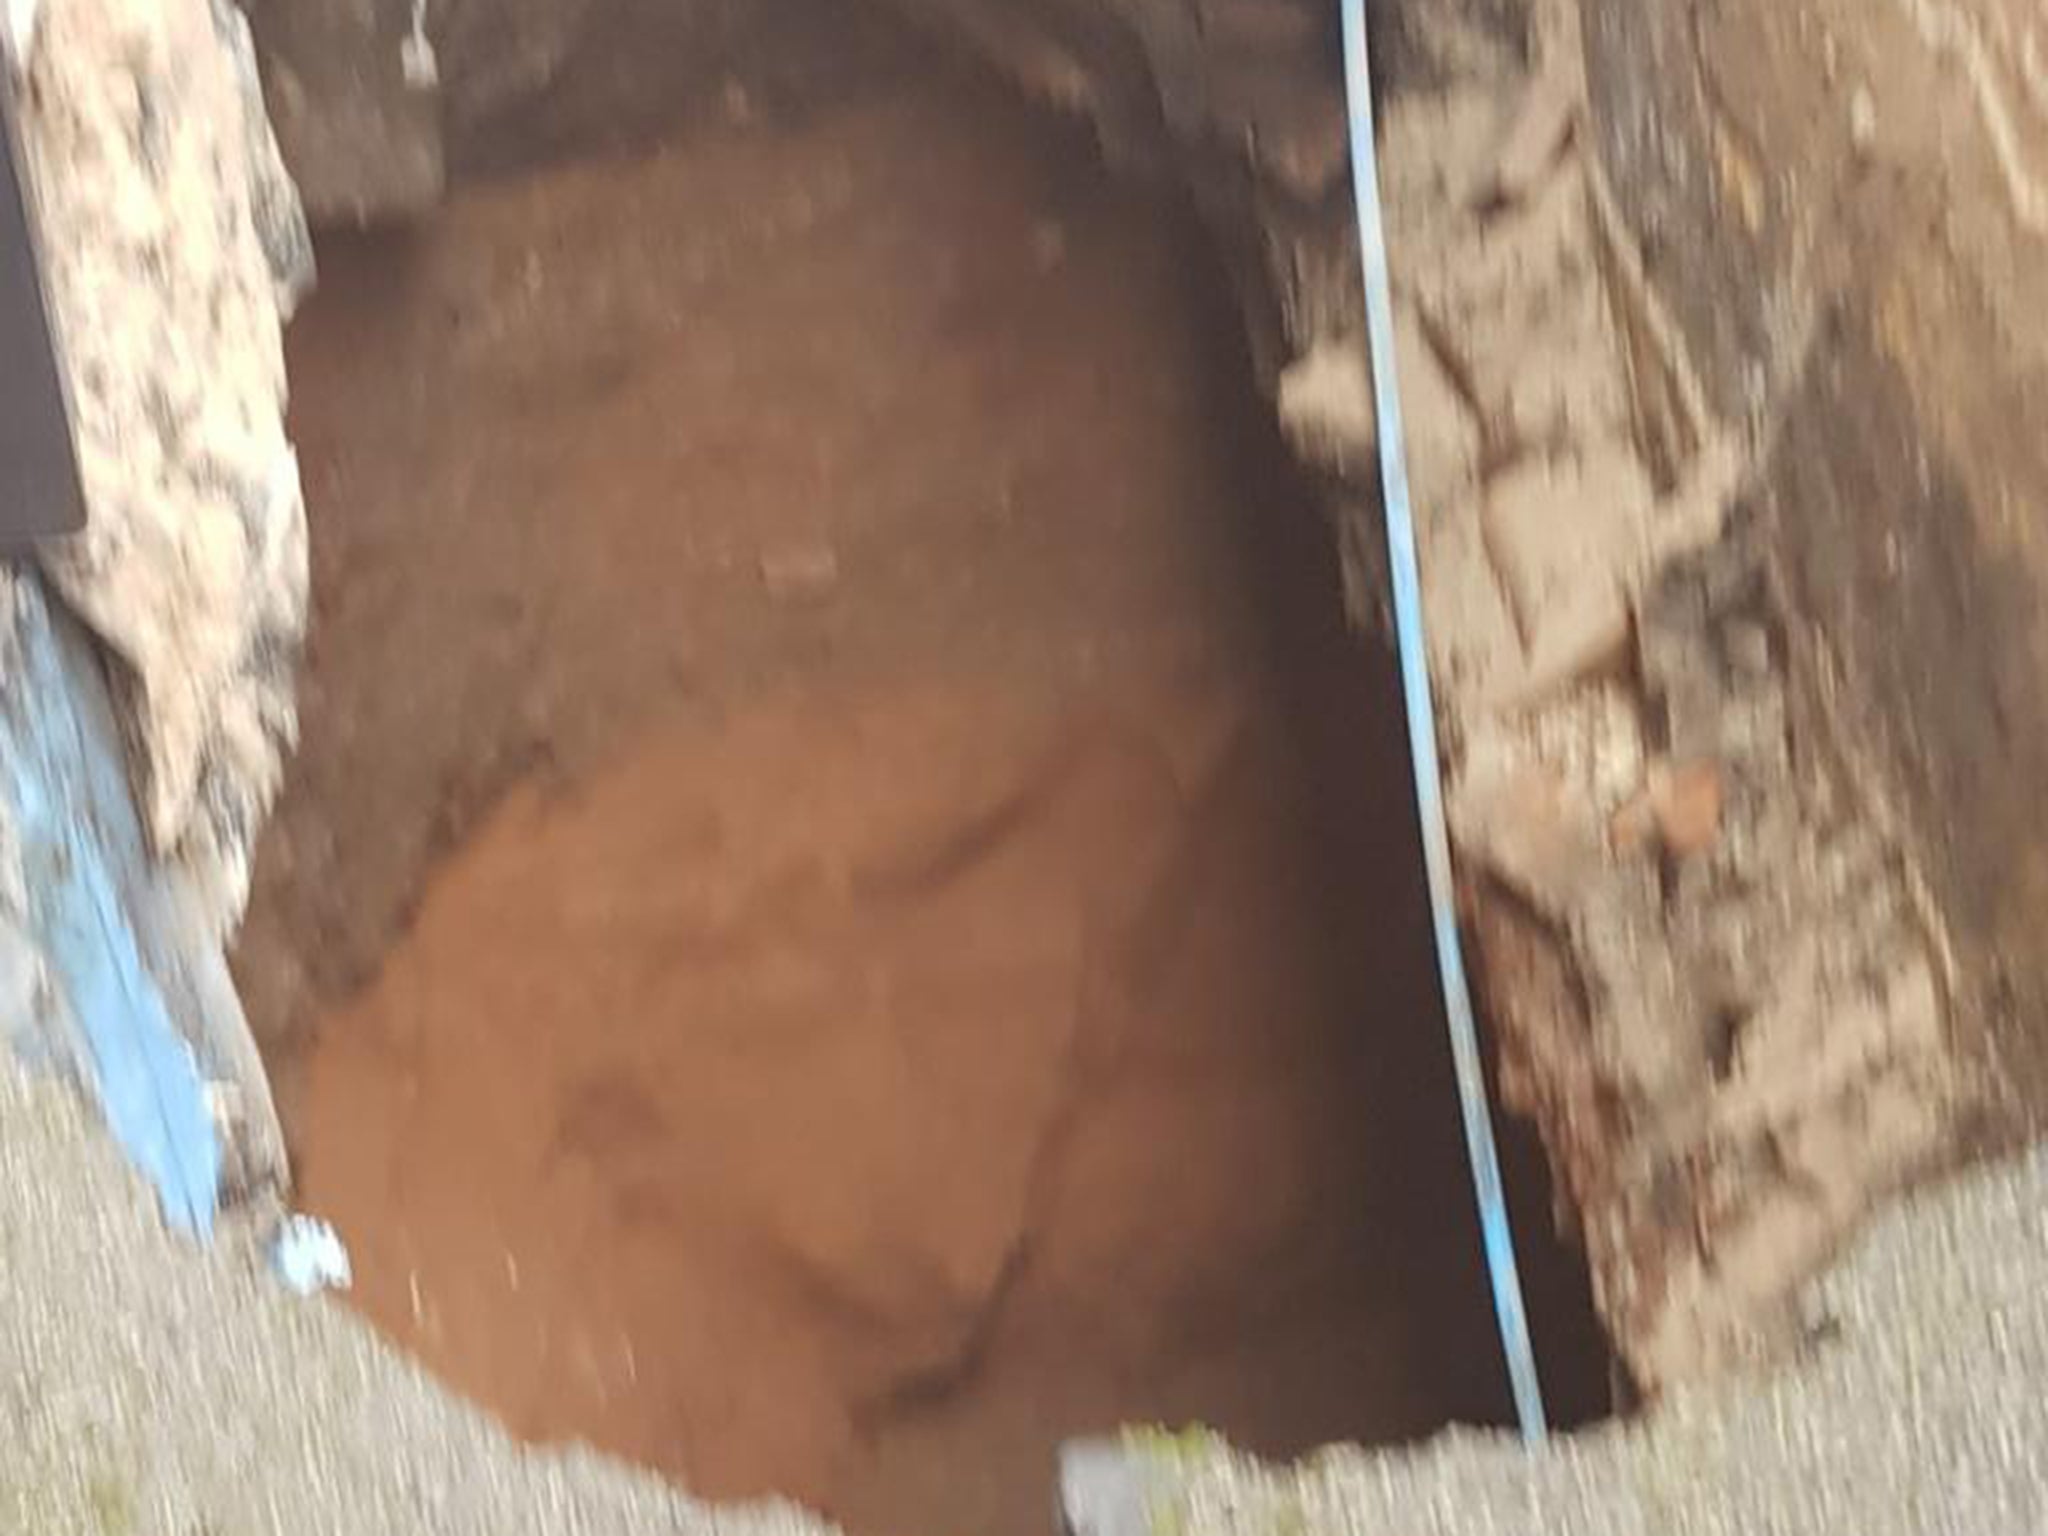 The sinkhole opened up in an alley behind Sainsbury’s in the centre of Ripon, North Yorkshire